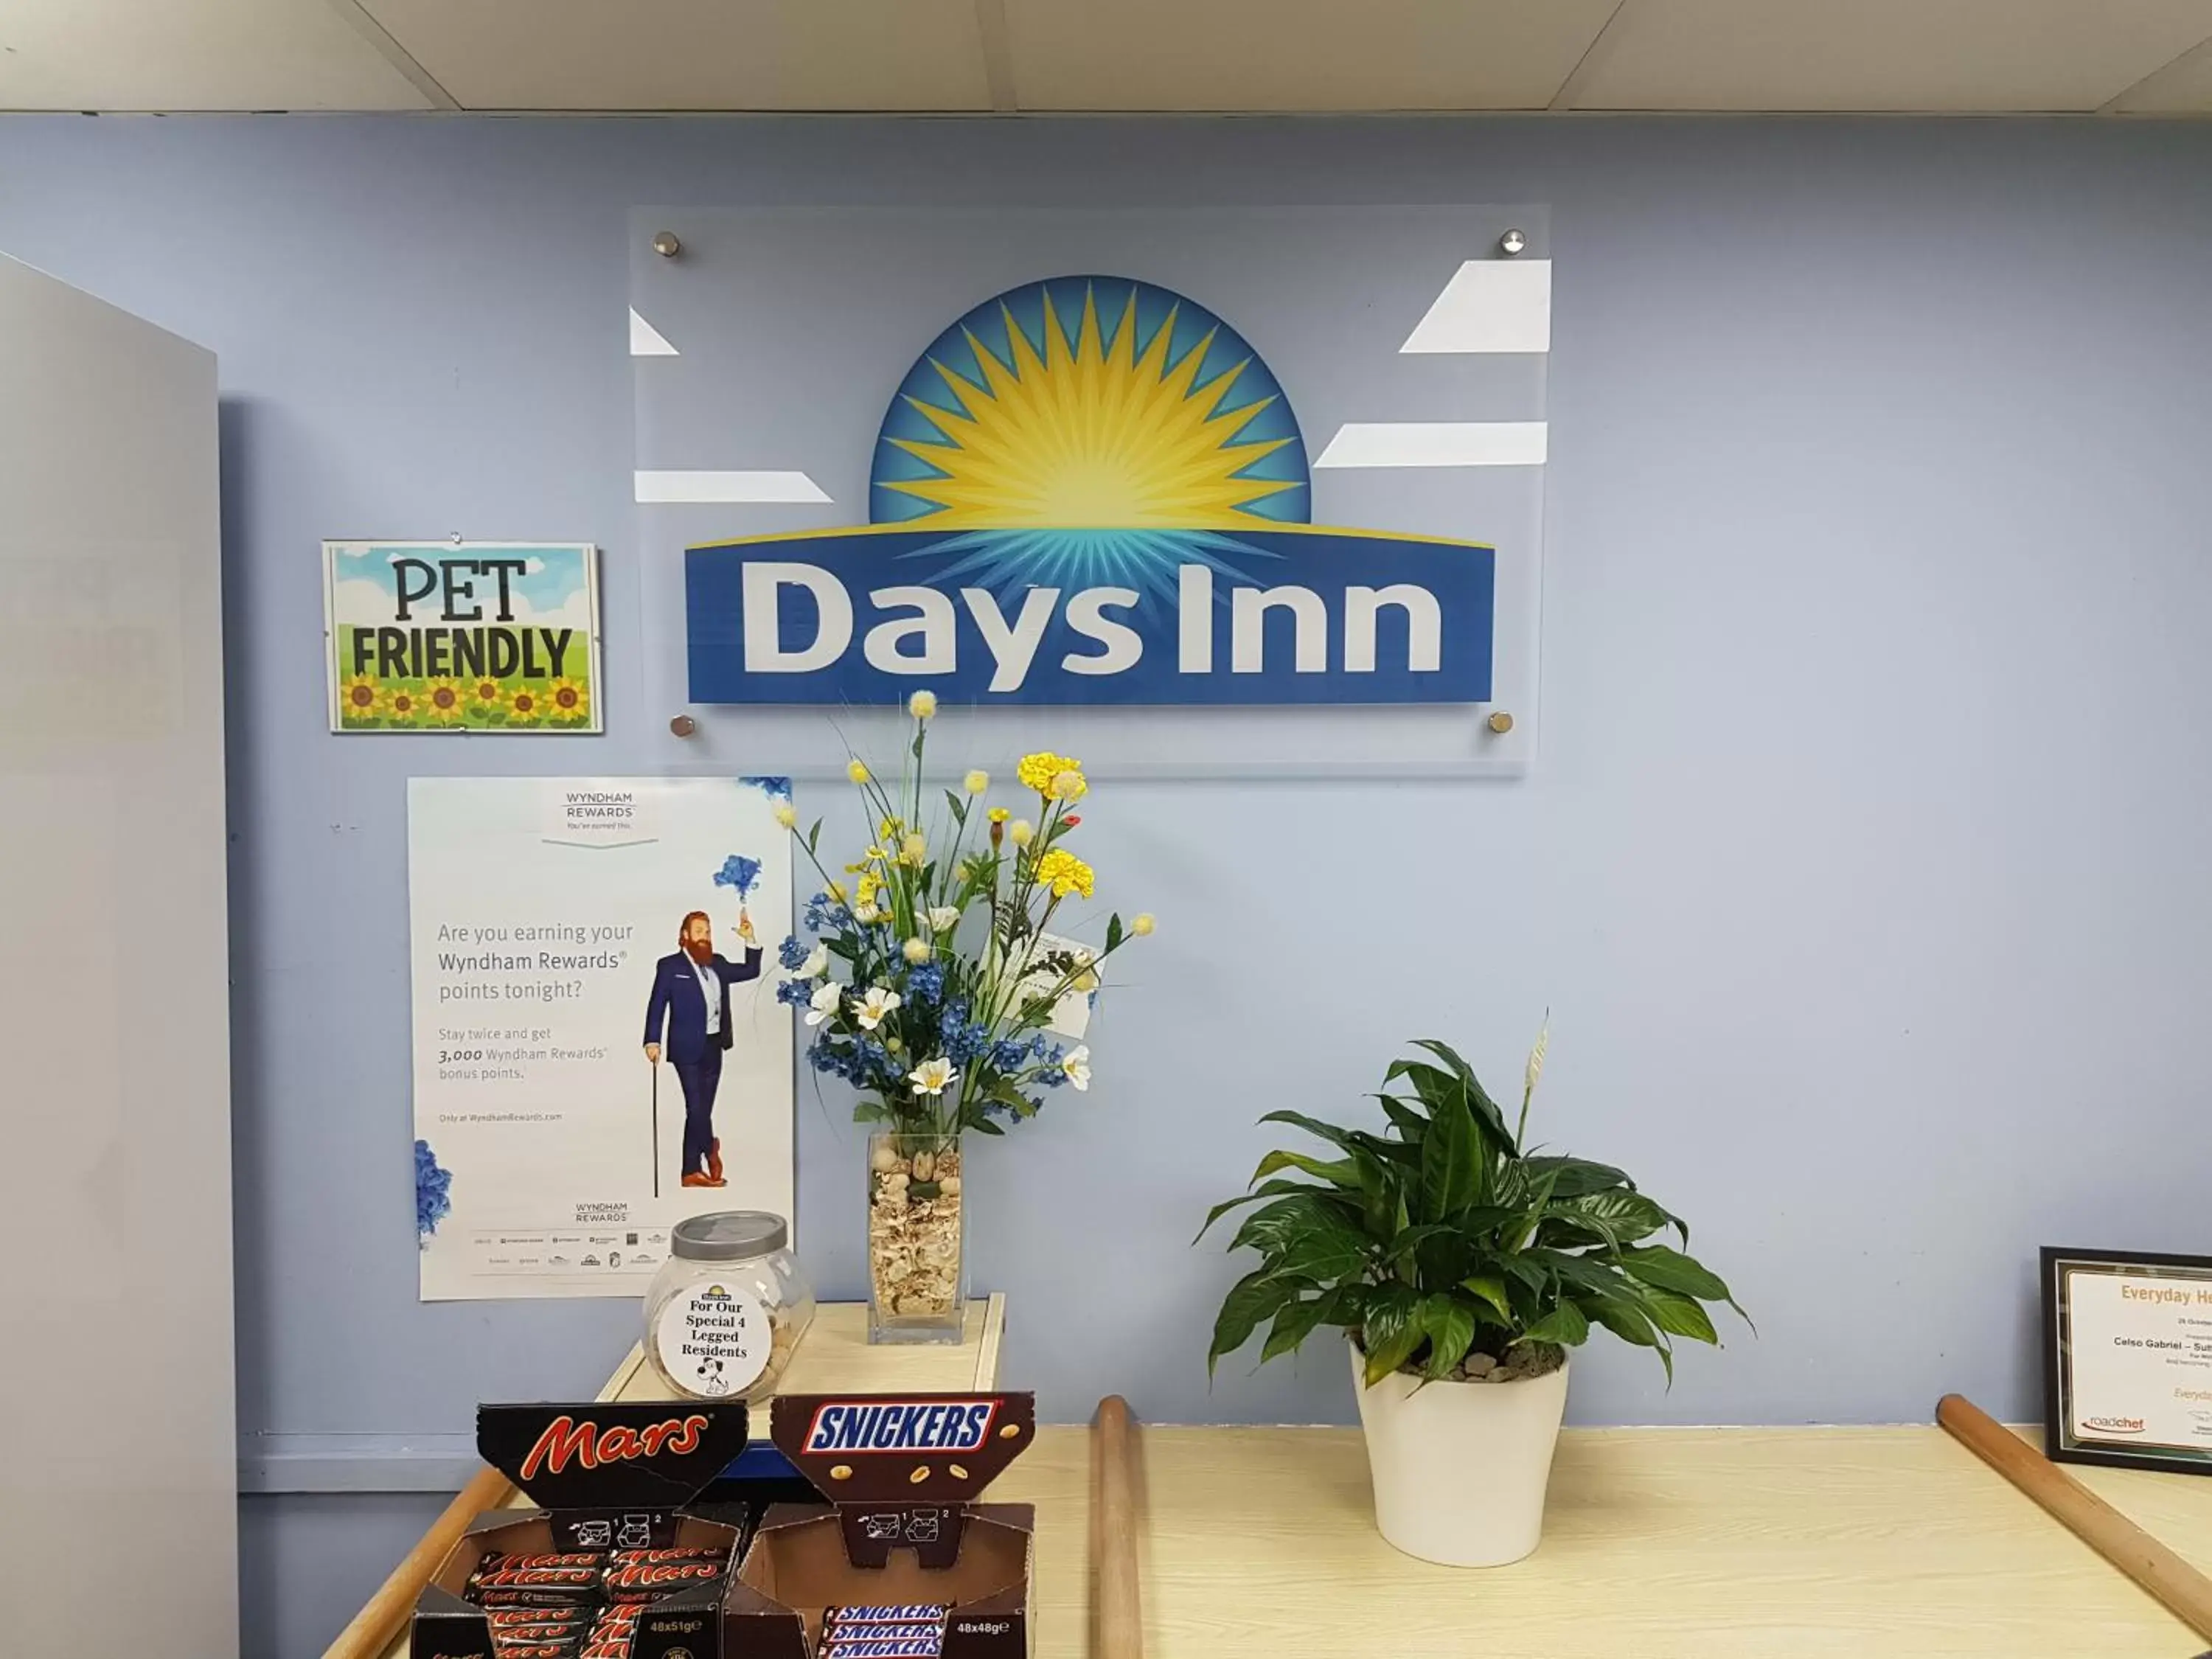 Property logo or sign in Days Inn Sutton Scotney North